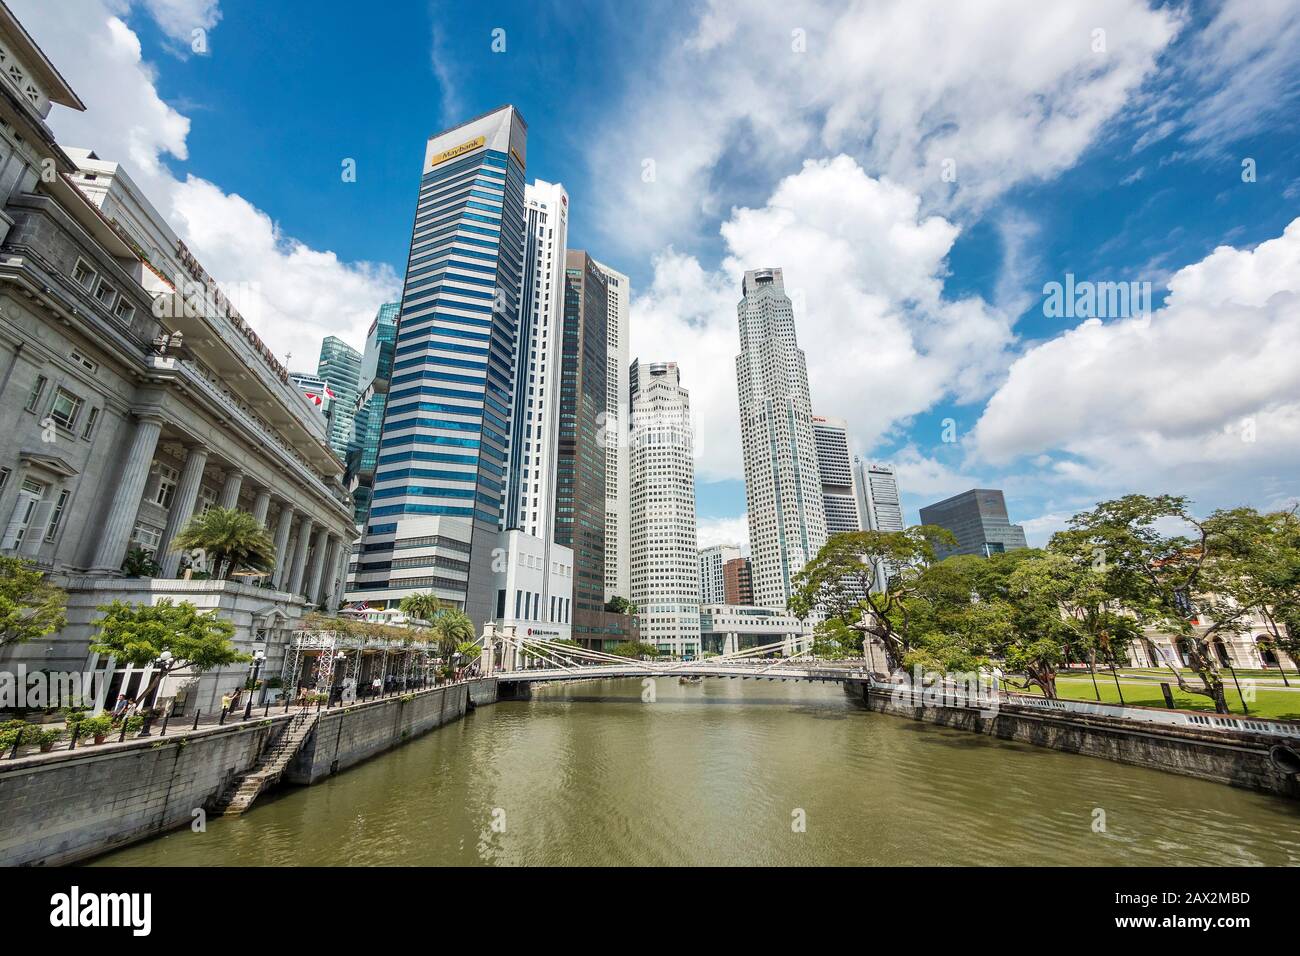 View of Singapore City skyline showing business buildings in the financial district. Stock Photo